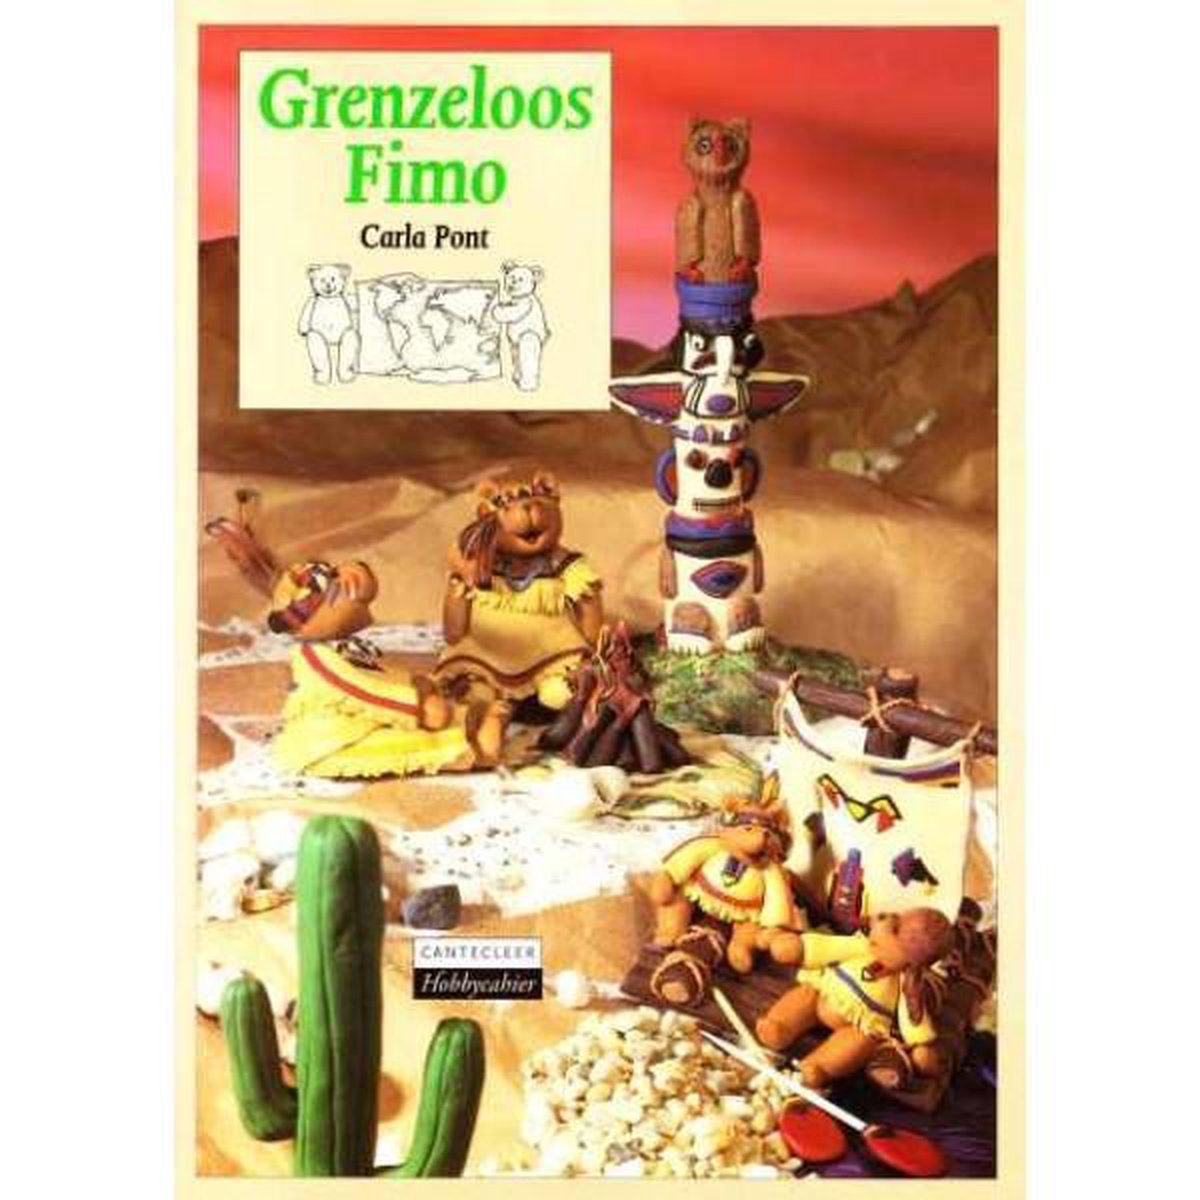 Grenzeloos Fimo